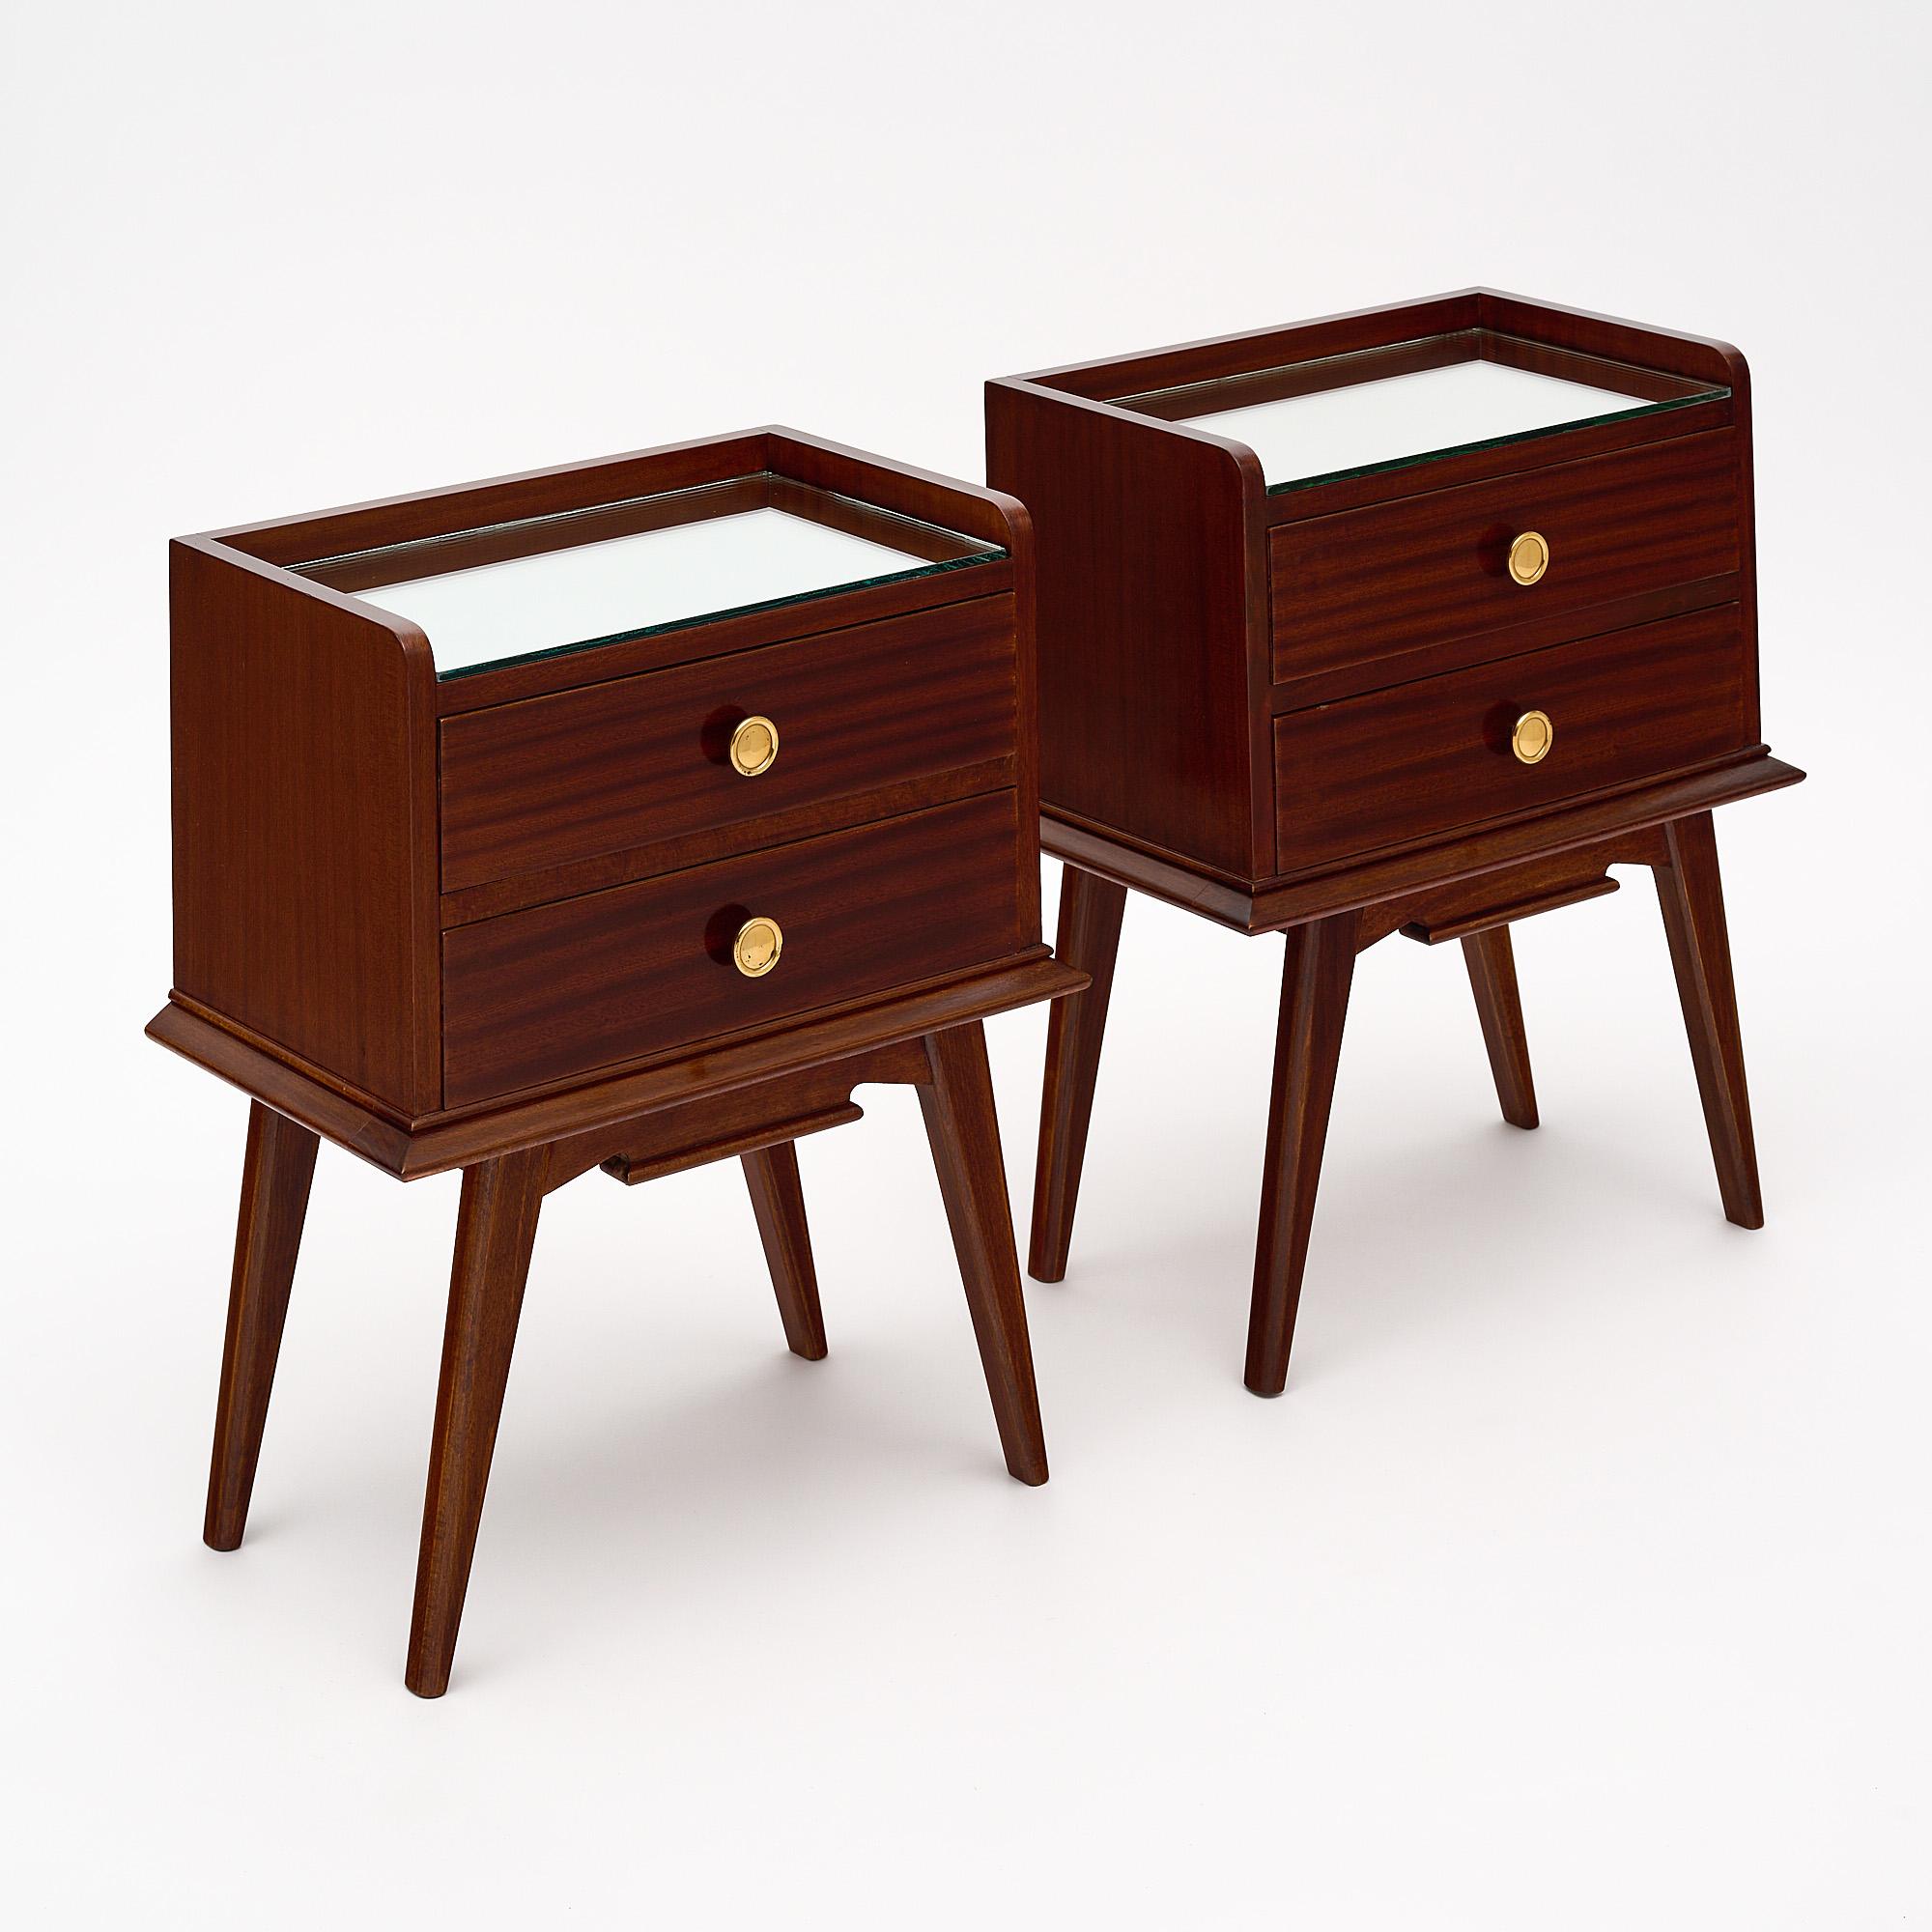 Pair of French side tables made of rosewood, in the manner of Jean Prouvé. Each table features four flaring tapered legs two dovetailed drawers and mirrored tops.